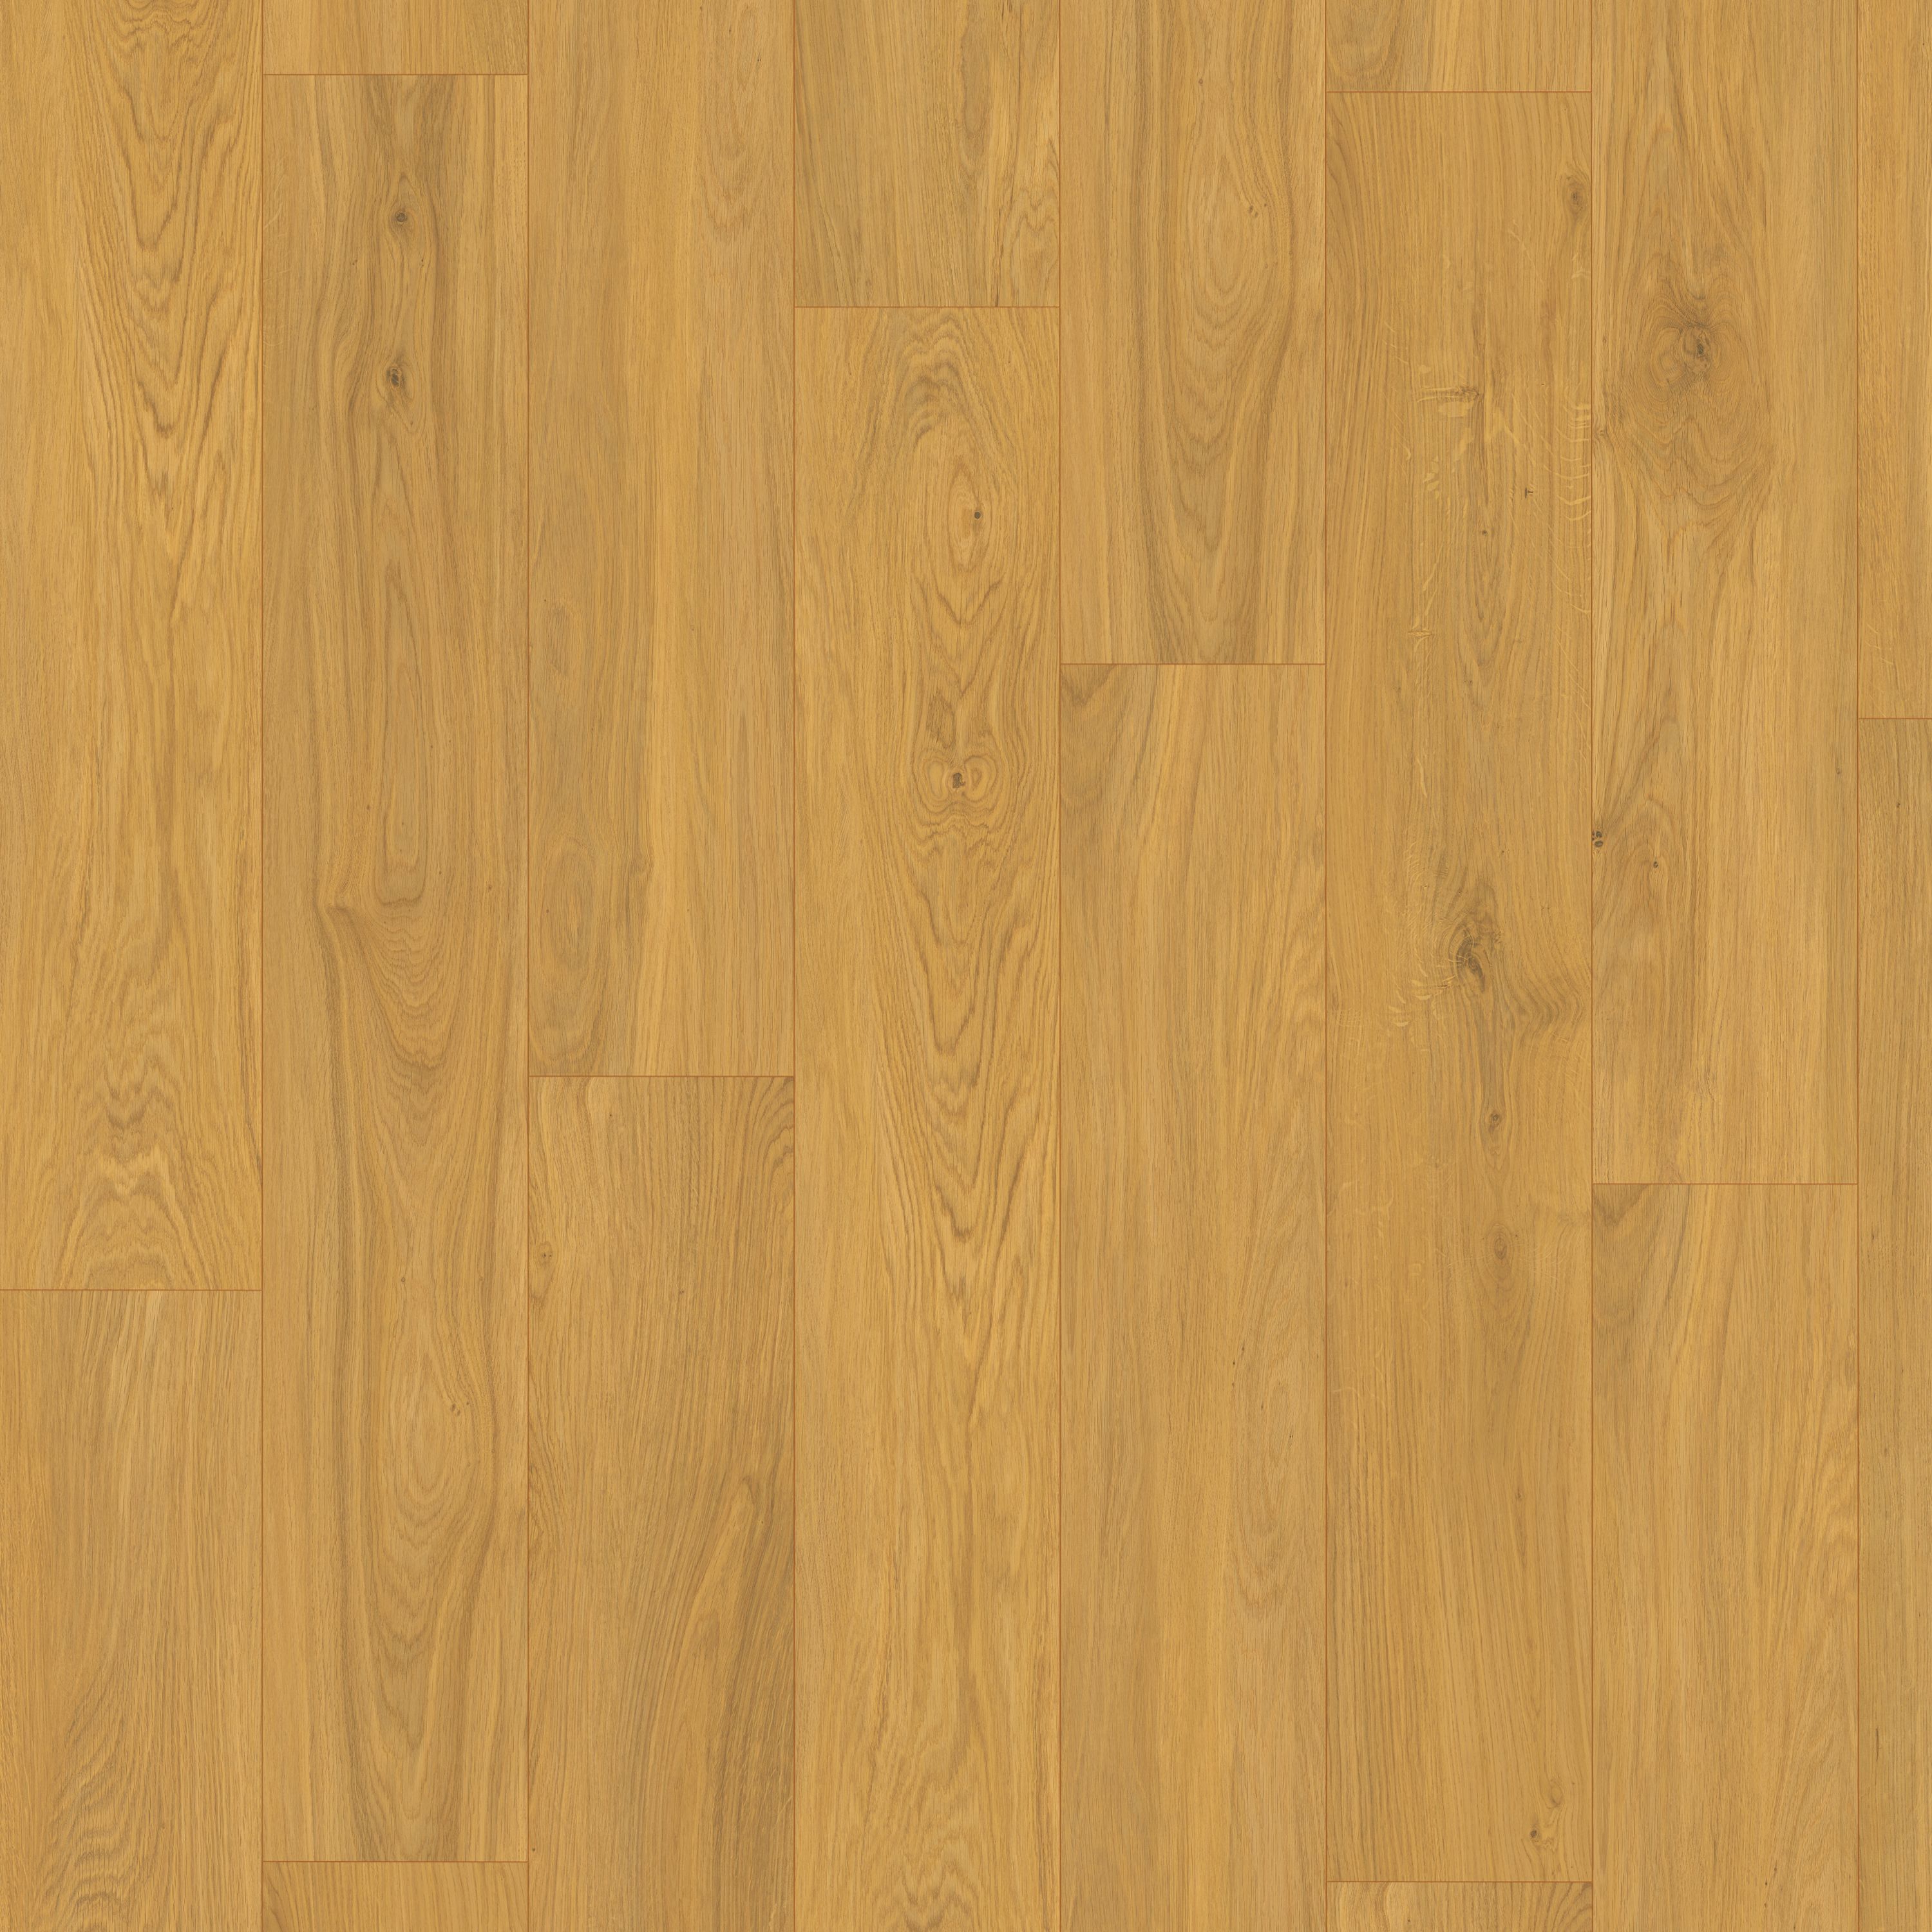 GoodHome Visby Pure Honey Wood effect Laminate Flooring, 1.99m²